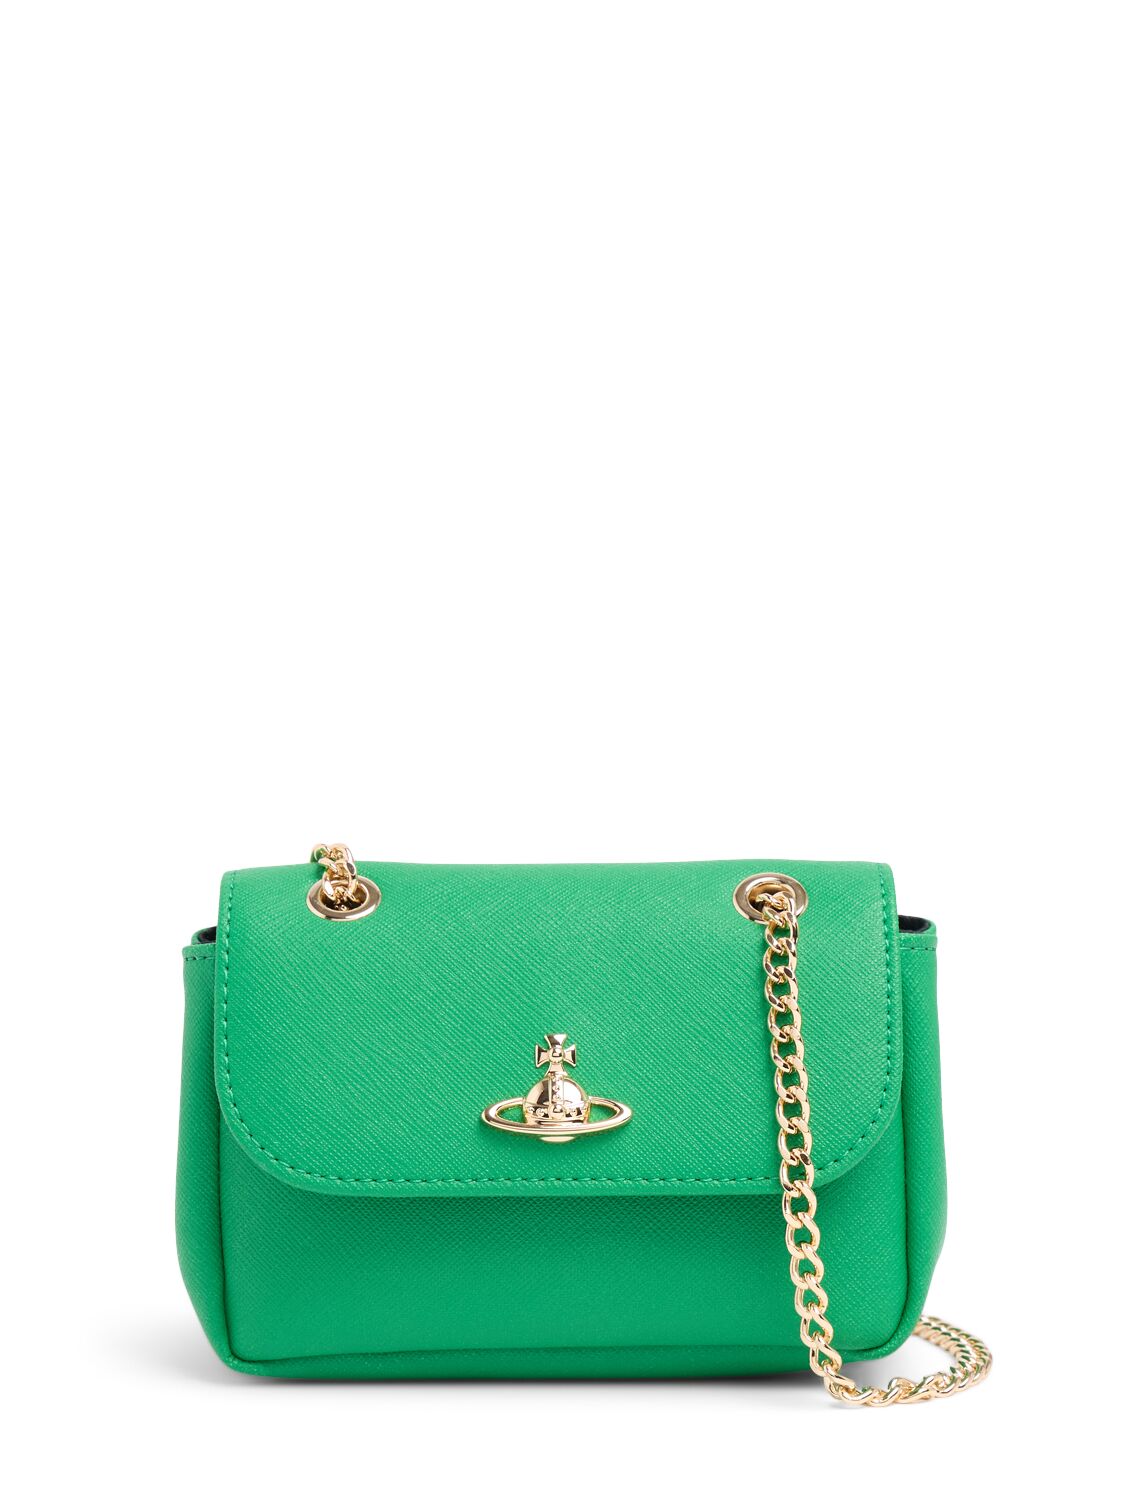 Vivienne Westwood Small Saffiano Faux Leather Bag In Bright Green